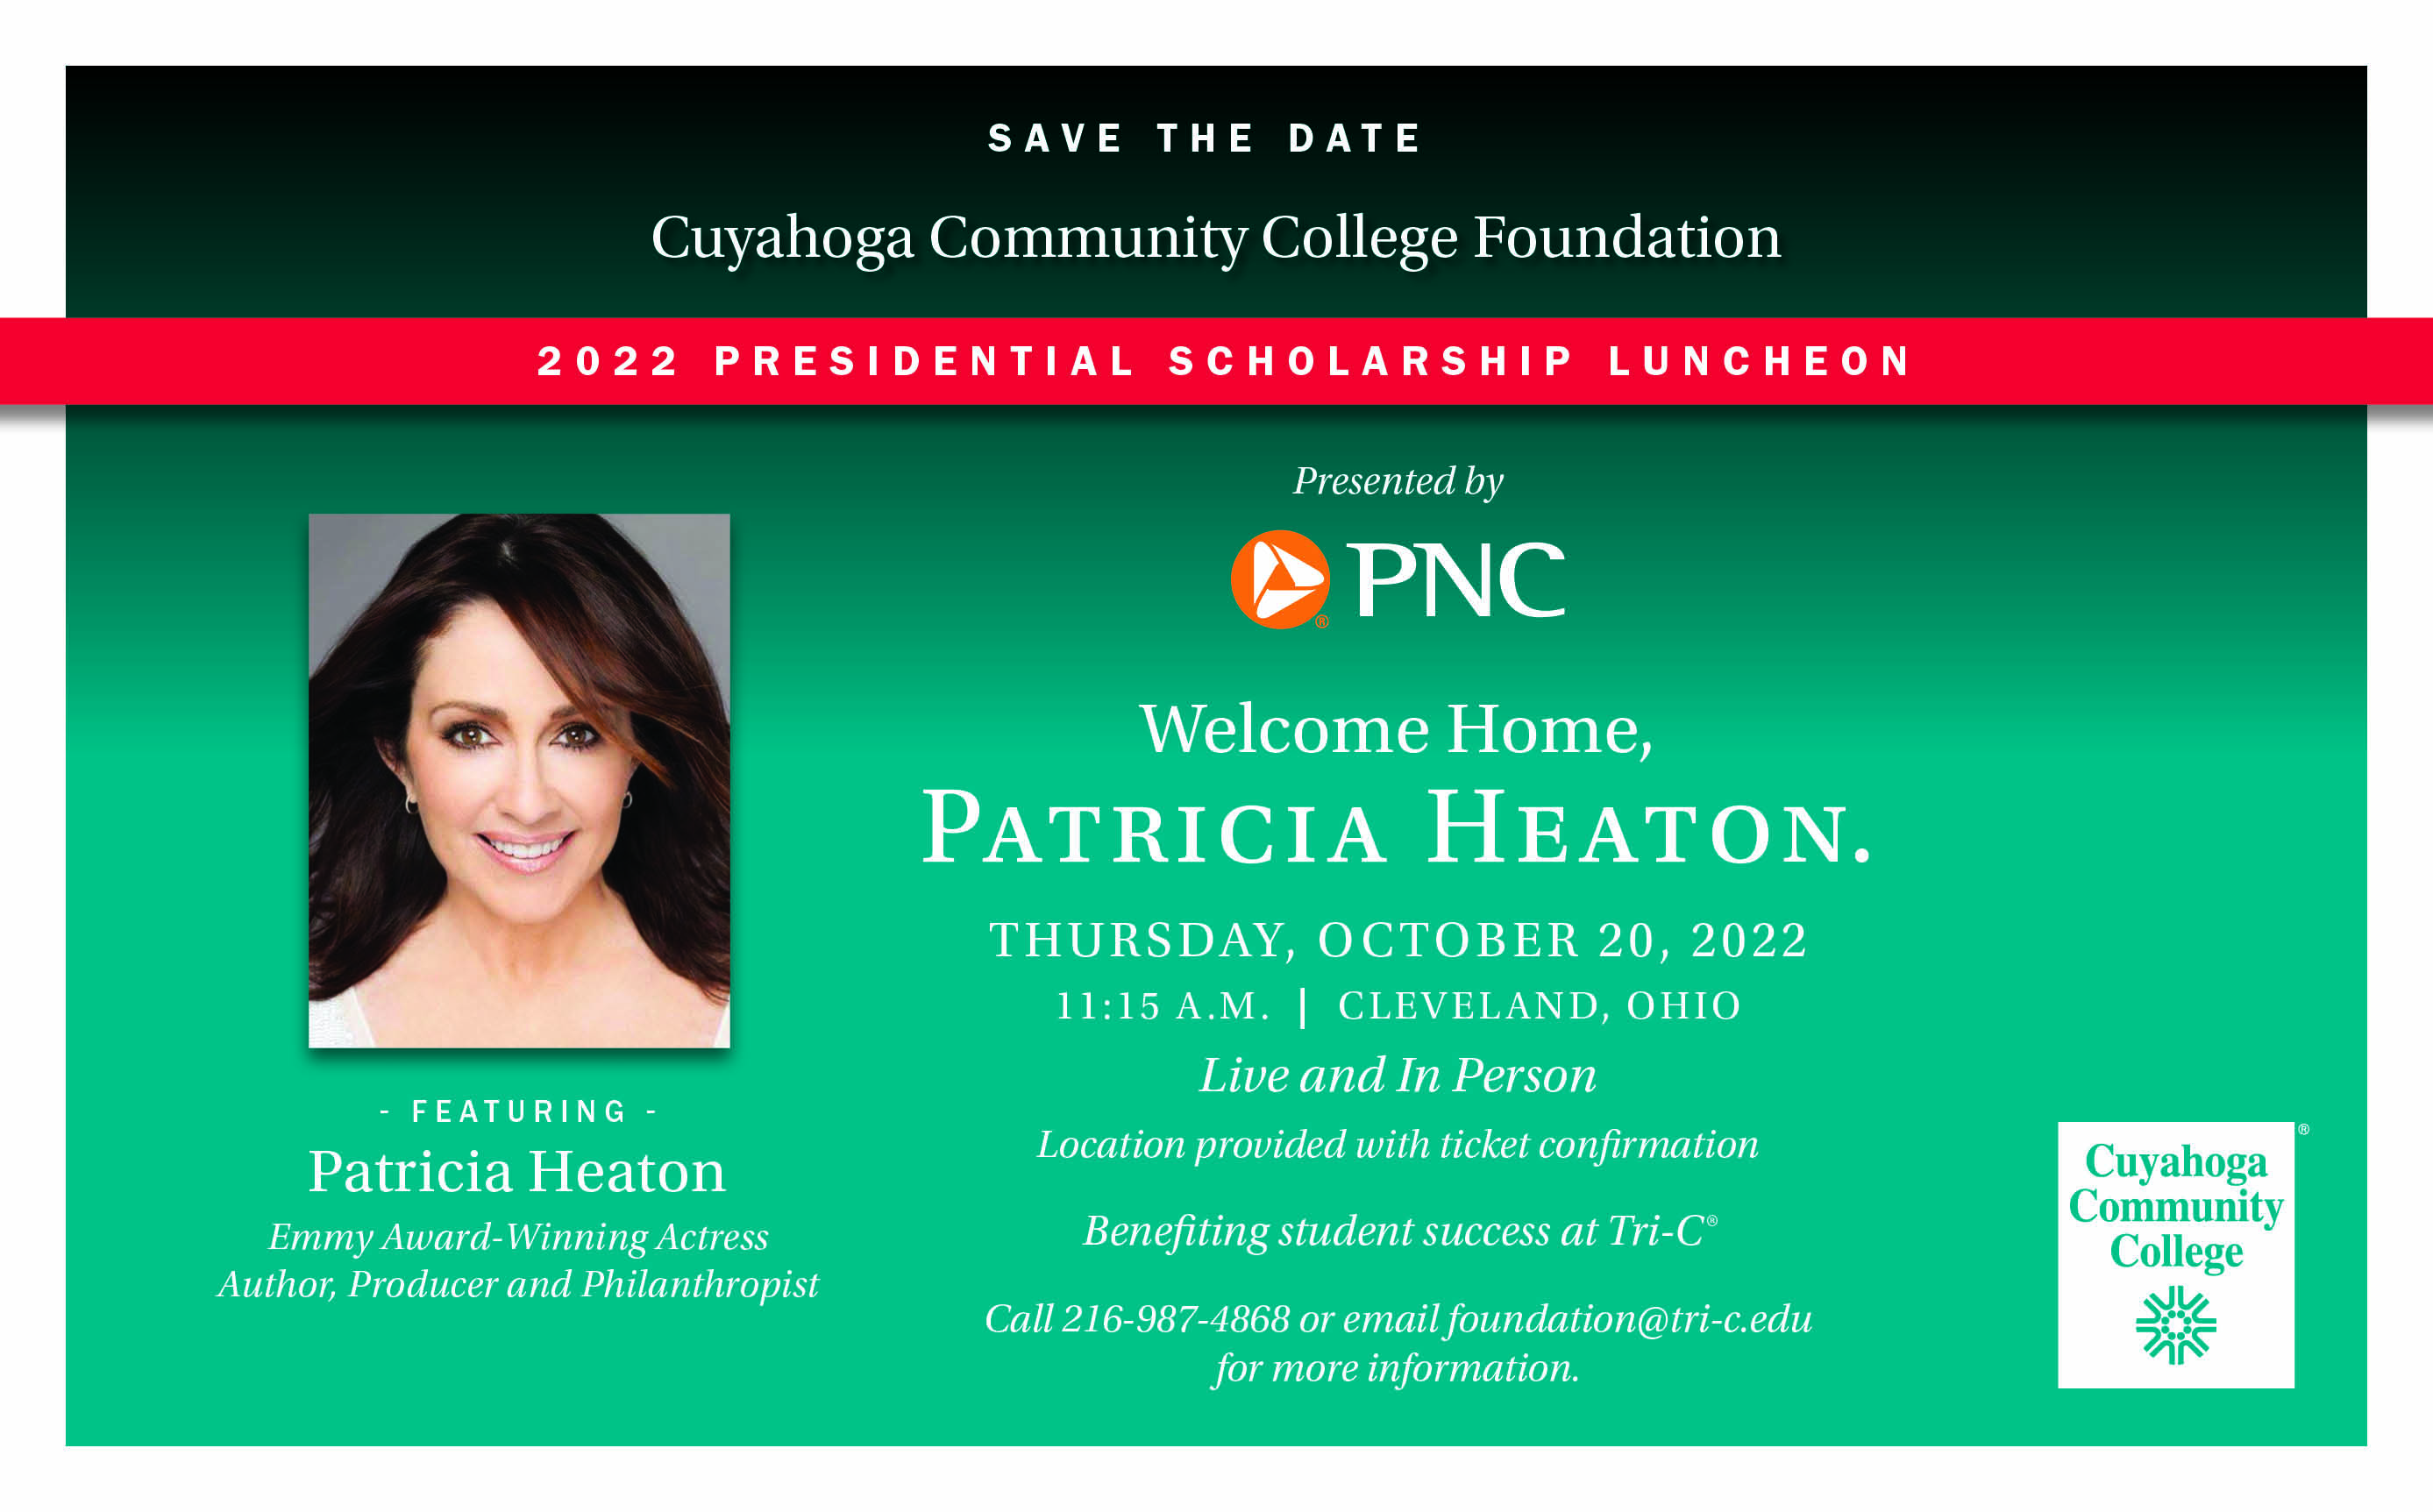 Presidential Scholarship Luncheon featuring Patricia Heaton is Oct. 20, 2022